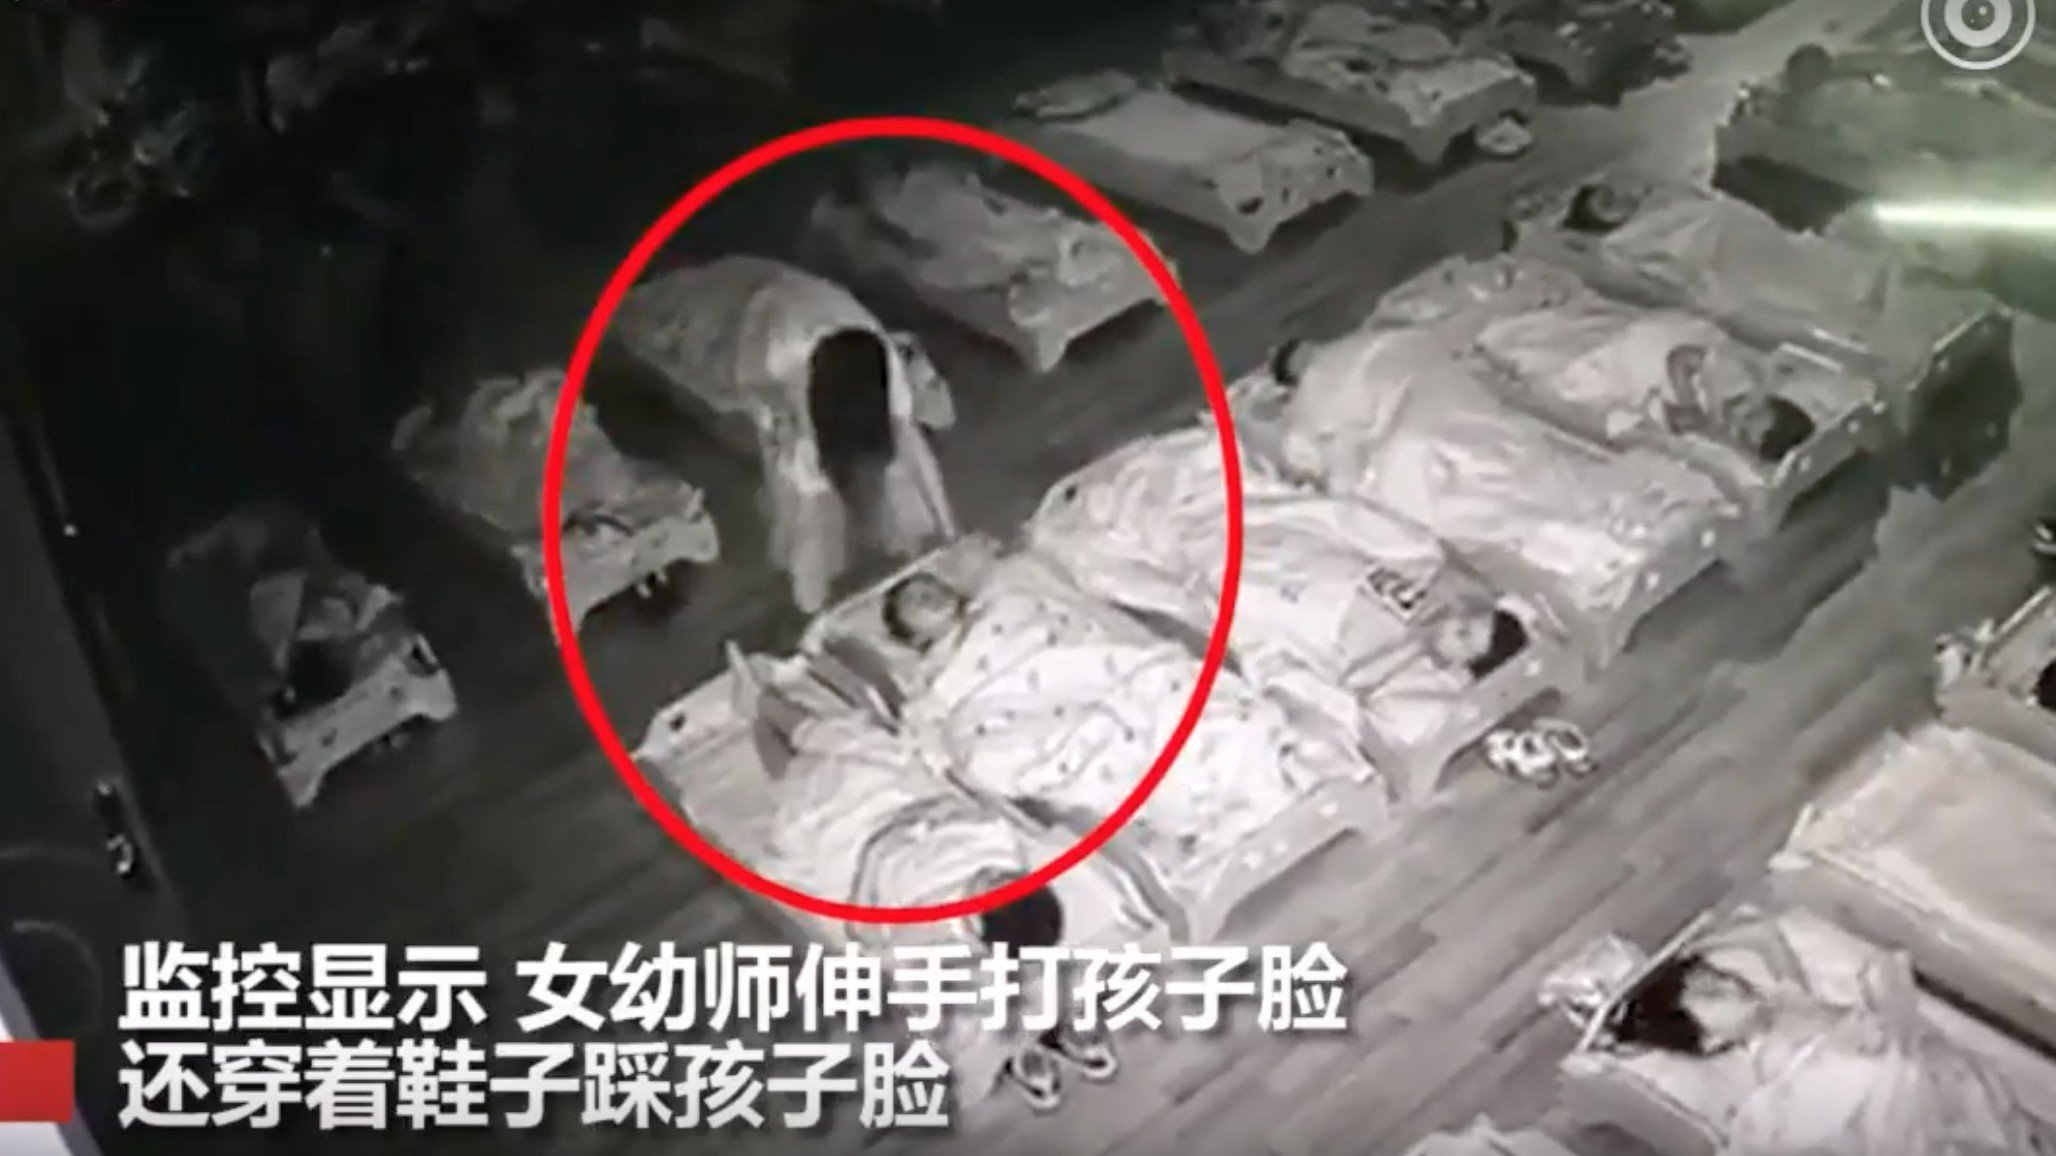 An investigation is under way into claims that a teacher at a kindergarten in southeast China stepped on the face of a child and assaulted two others. Photo: YouTube